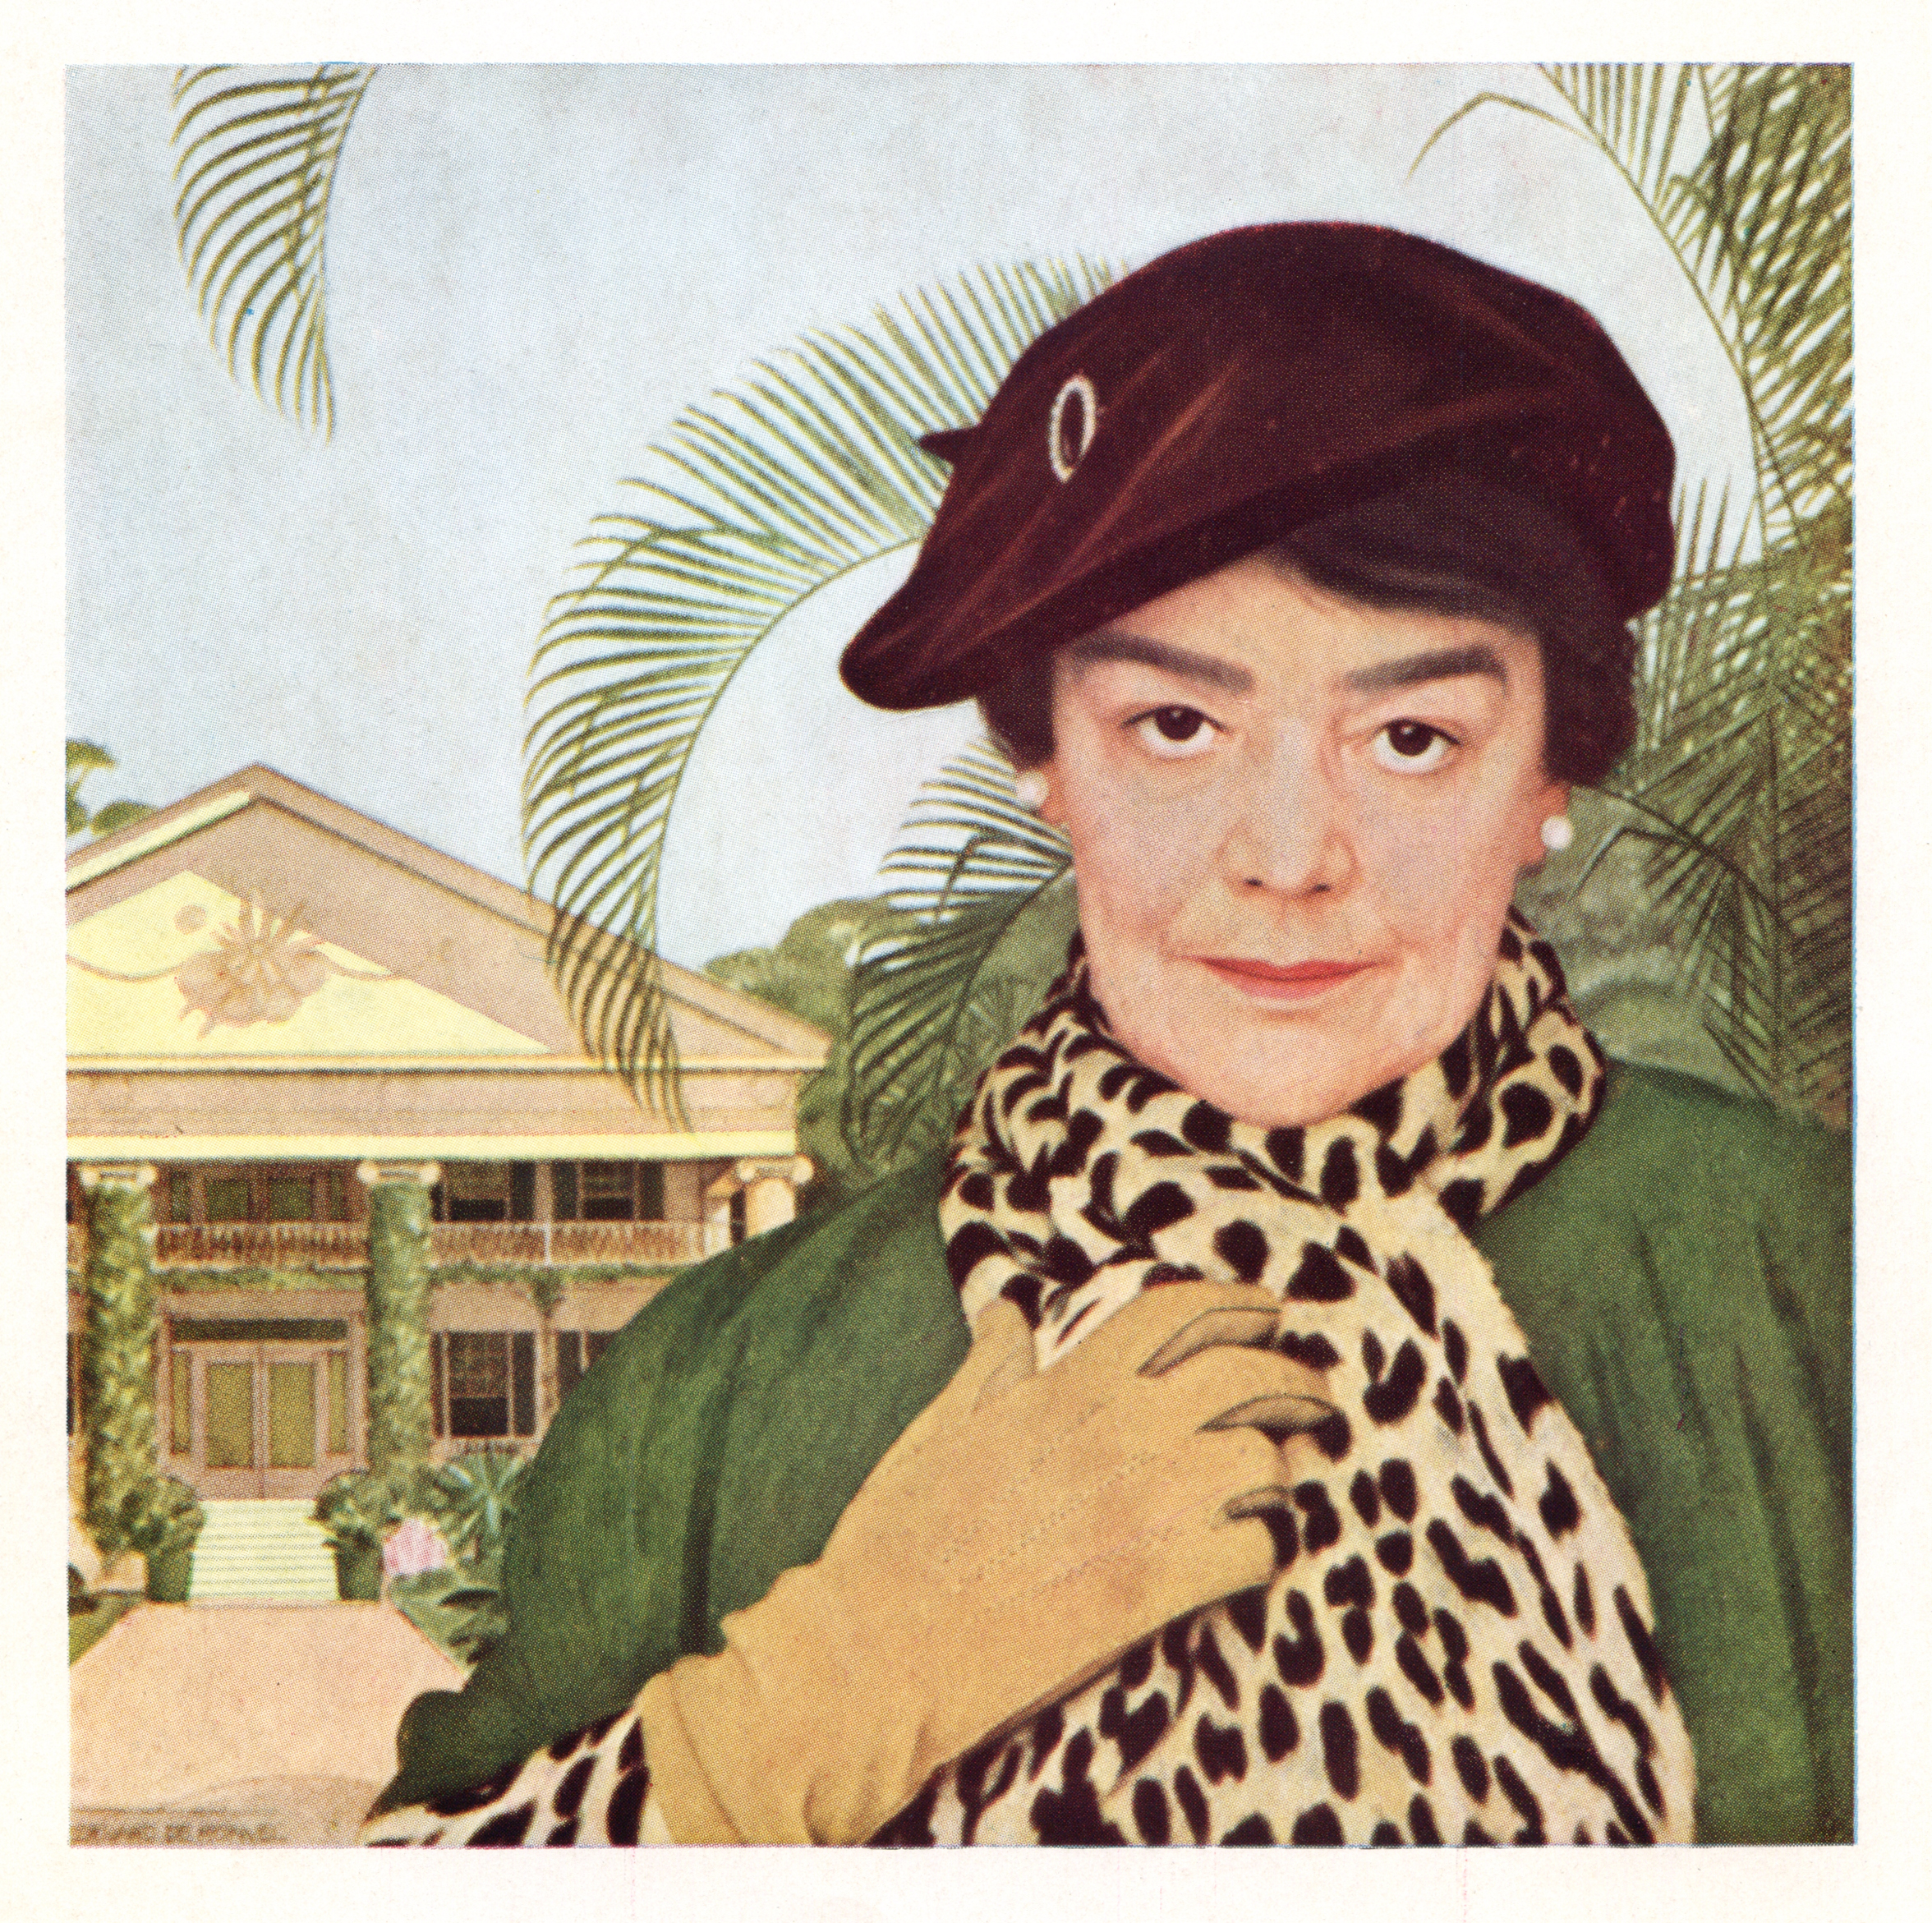 Helen Hay Whitney, from the 1938 Thoroughbred Club of America program (Ken Grayson Collection)